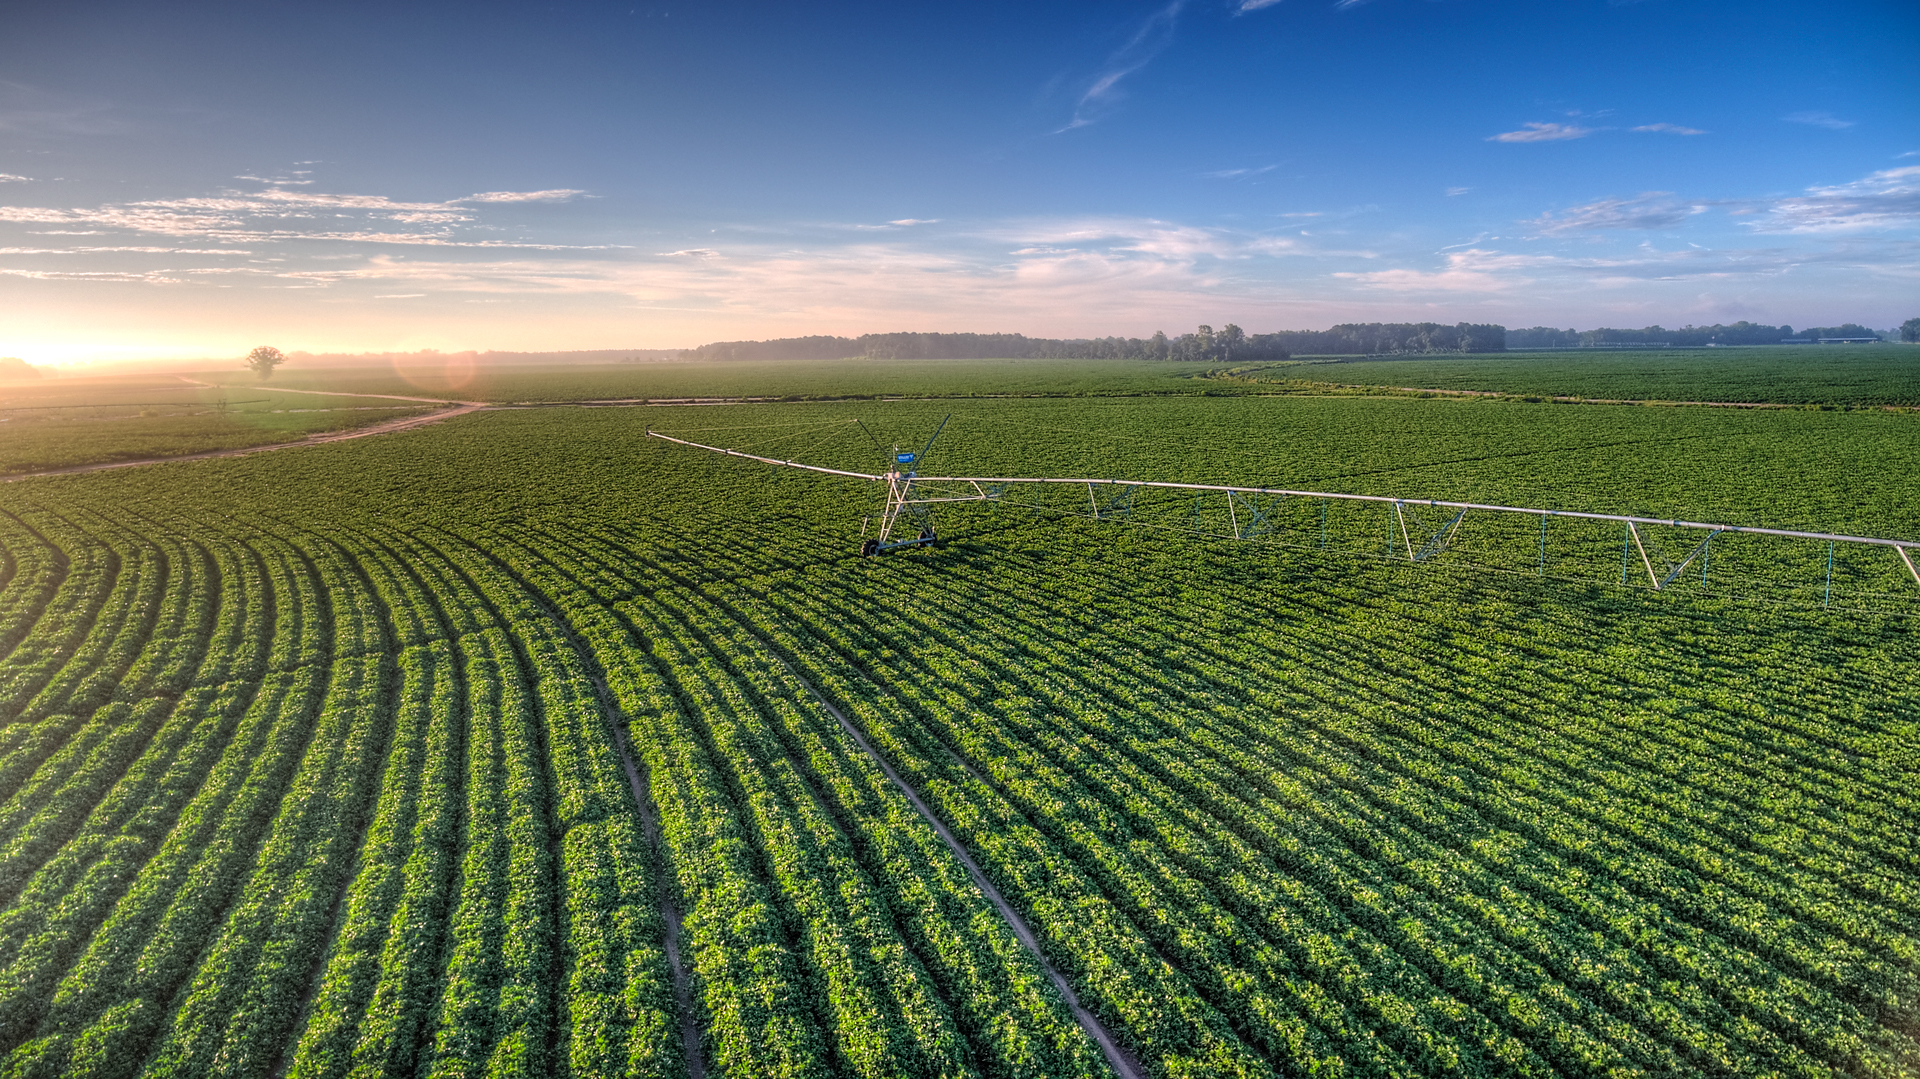 Driving the digital transformation of AgTech, an interview with Prospera CEO Daniel Koppel